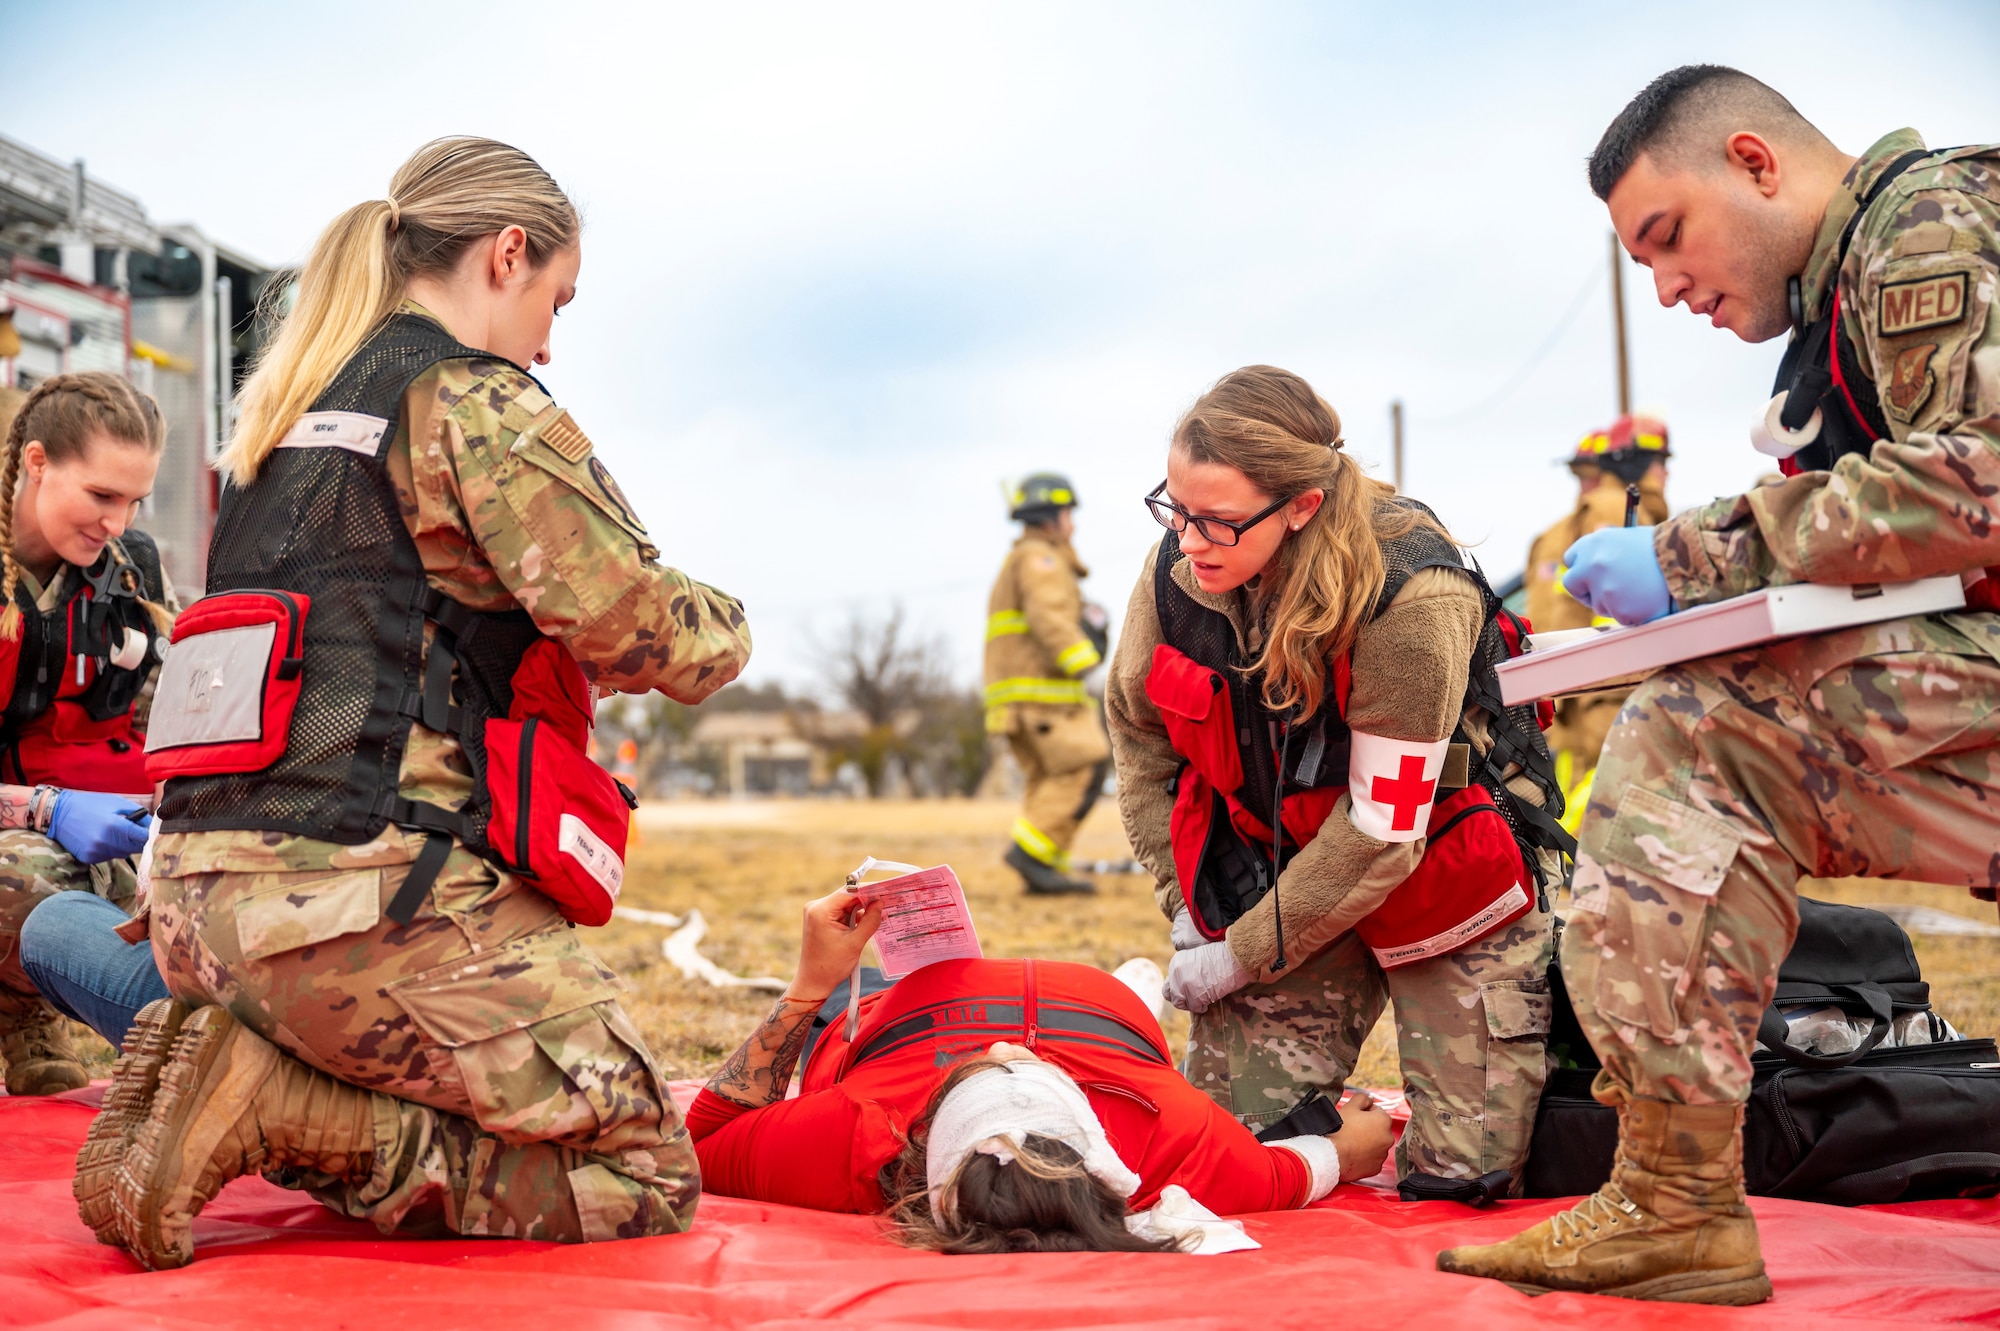 Airmen from the 7th Medical Group stabilize a simulated medical patient during the Ready Eagle II exercise capstone at Dyess Air Force Base, Texas, Jan. 25, 2024. Ready Eagle II was a 3-day medical training event to enhance the medical contingency response of the 7th MDG while testing and training multiple home station medical response teams. (U.S. Air Force photo by Senior Airman Leon Redfern)